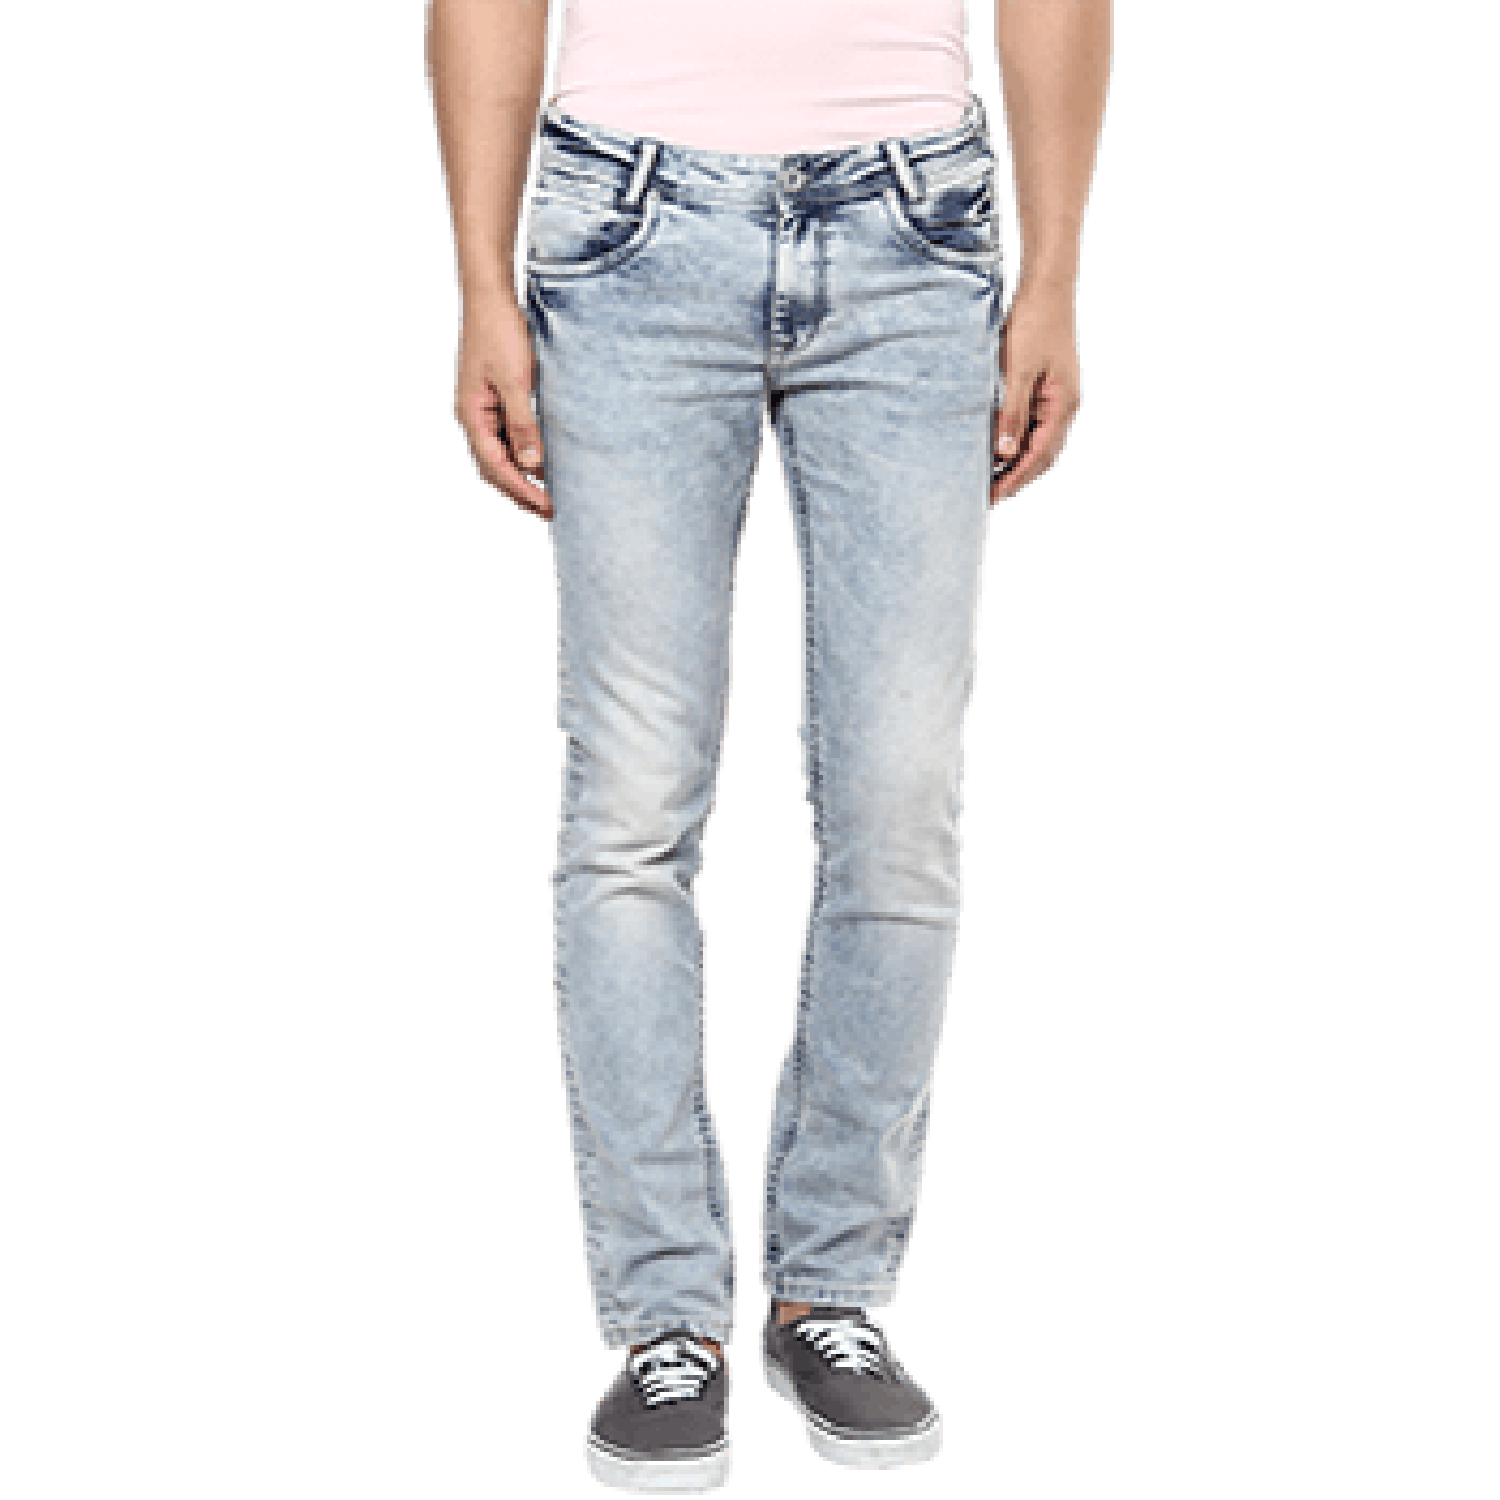 Blue Jeans PNG Free Photo PNG Image